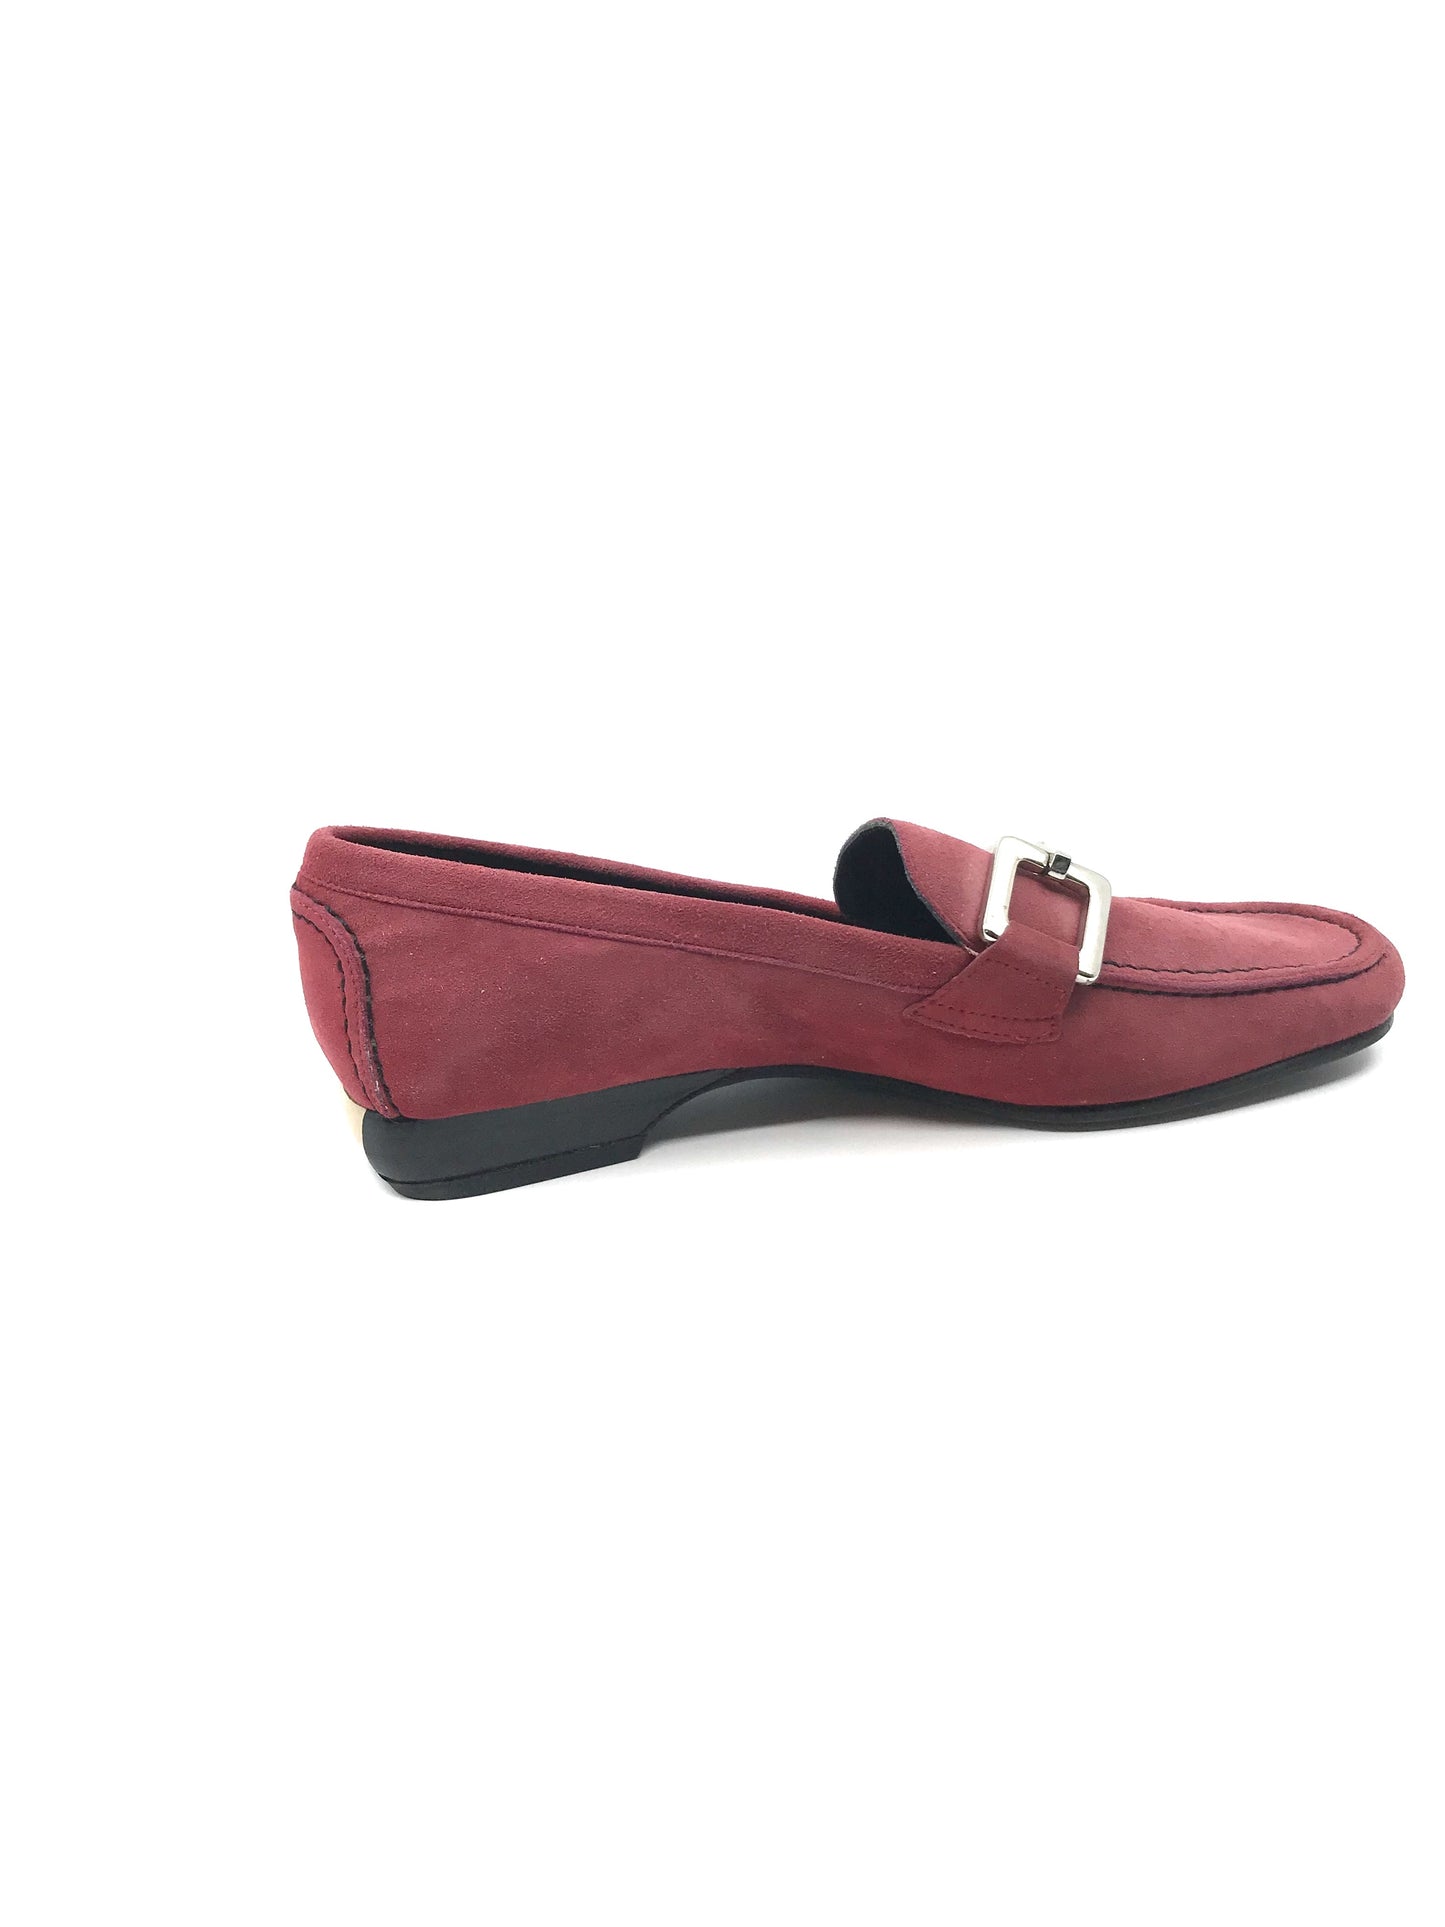 Maxy Red Suede Claudia Ciuti Loafers